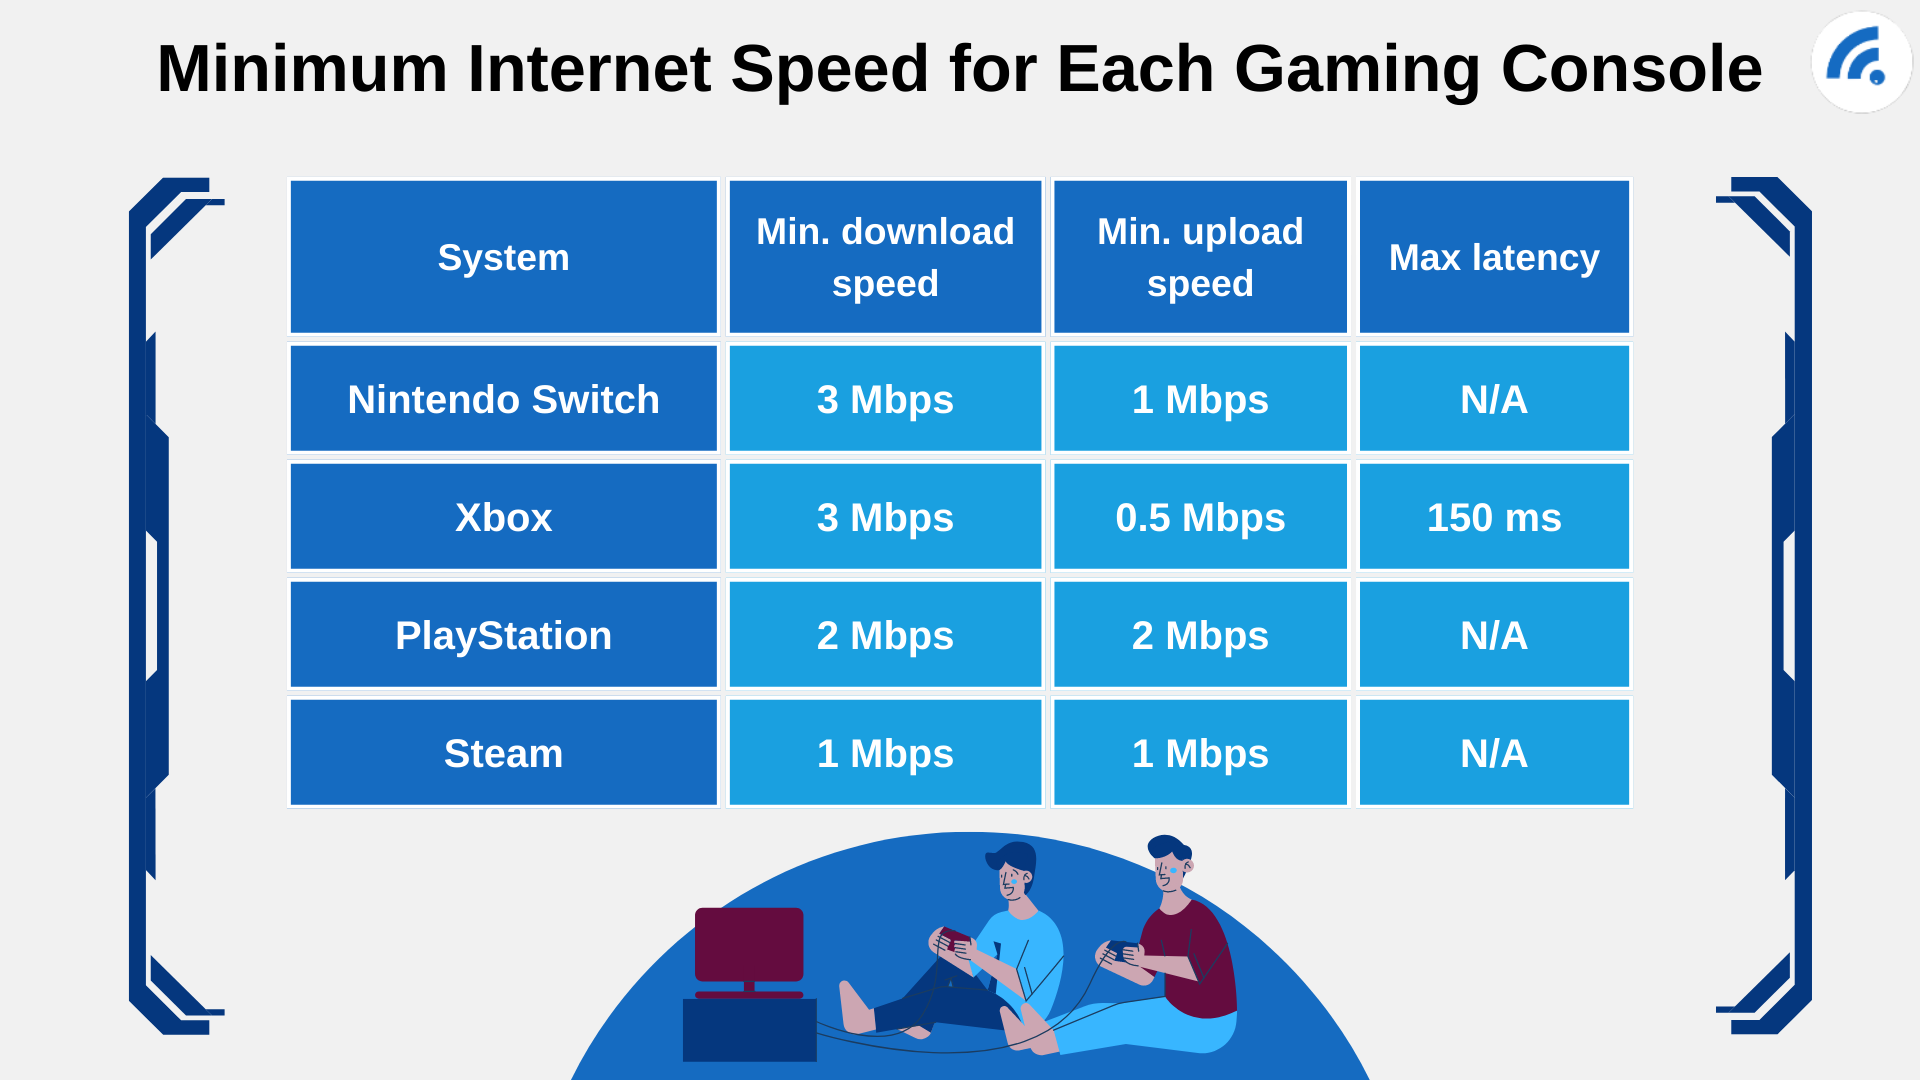 What Is a Good Download Speed for Gaming?